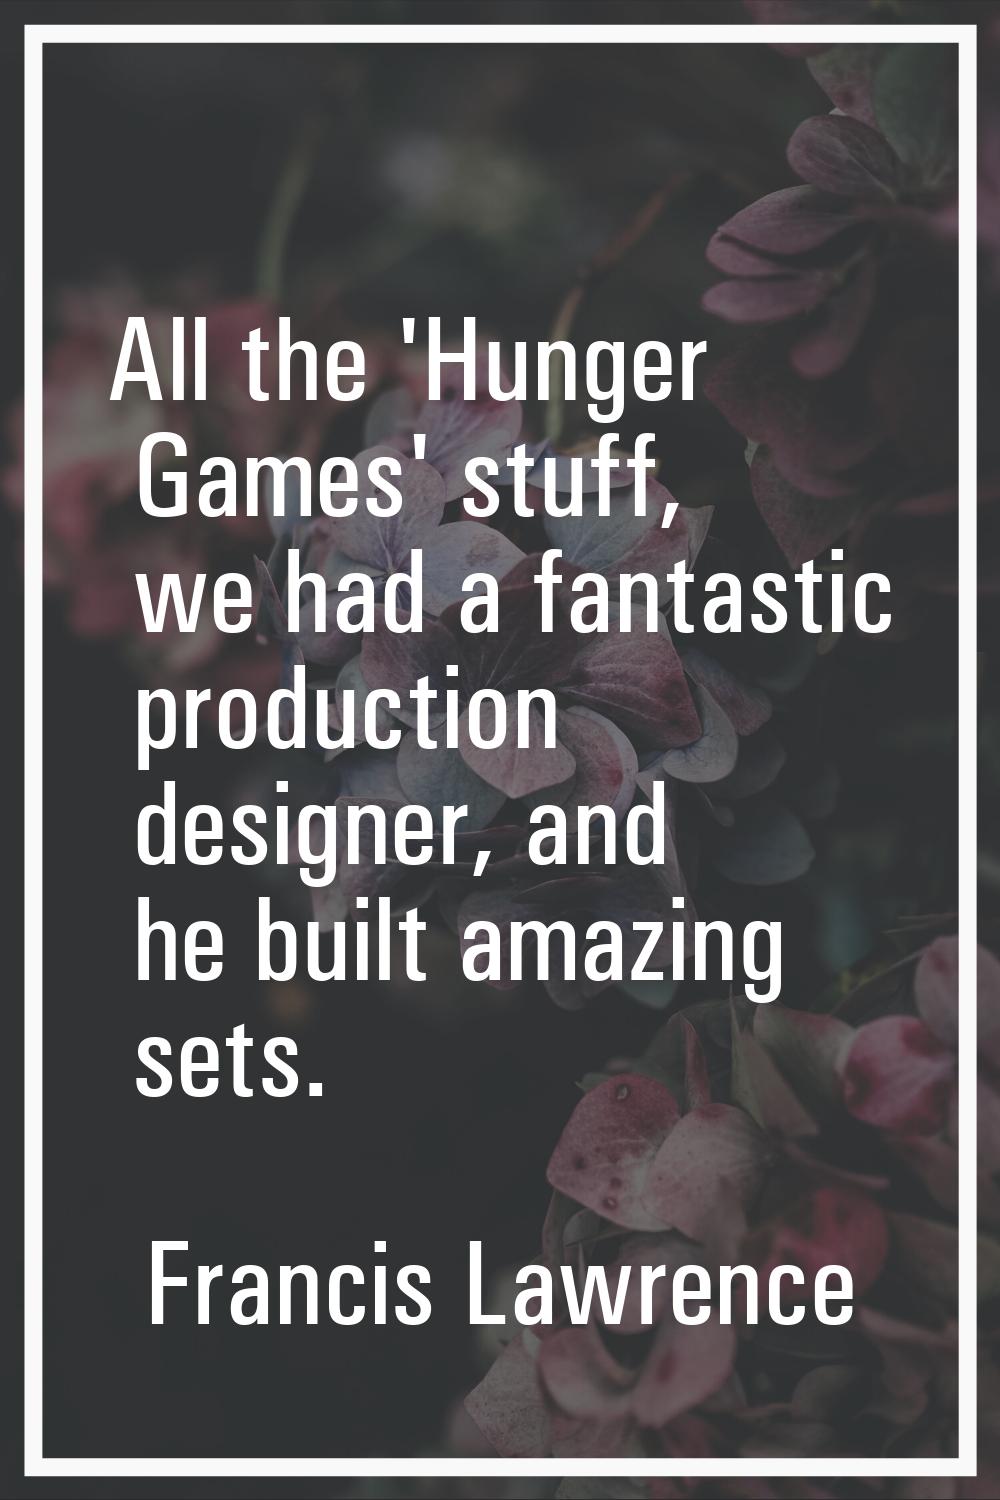 All the 'Hunger Games' stuff, we had a fantastic production designer, and he built amazing sets.